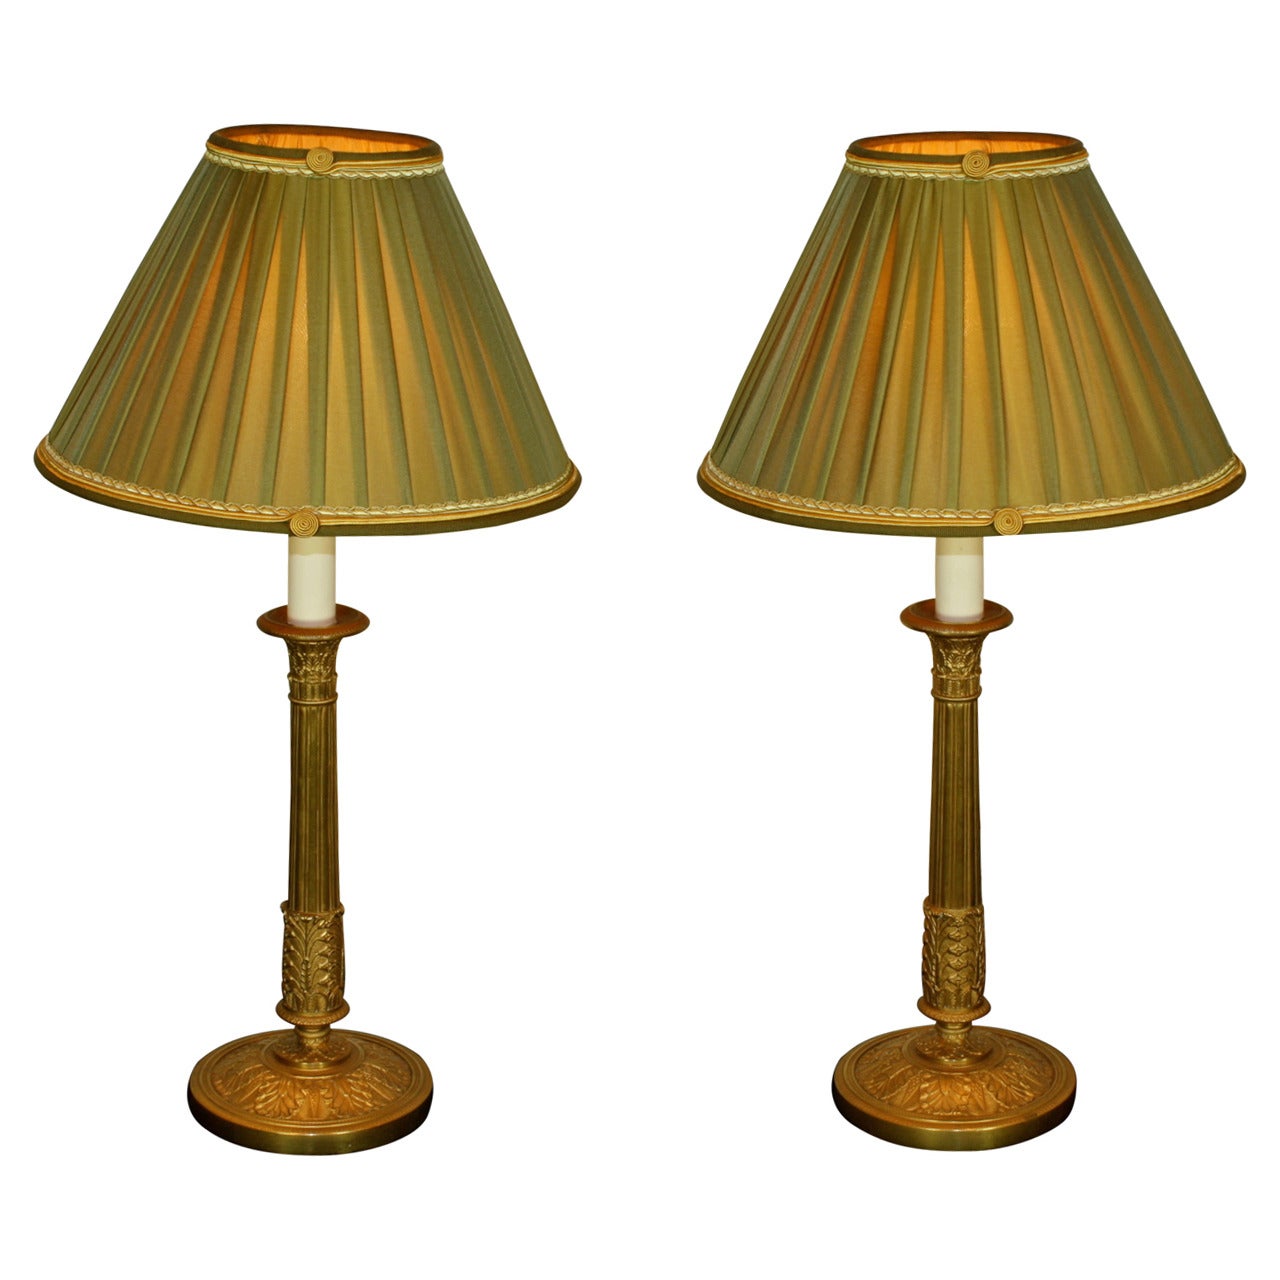 Pair of Elegant French Candlestick Lamps